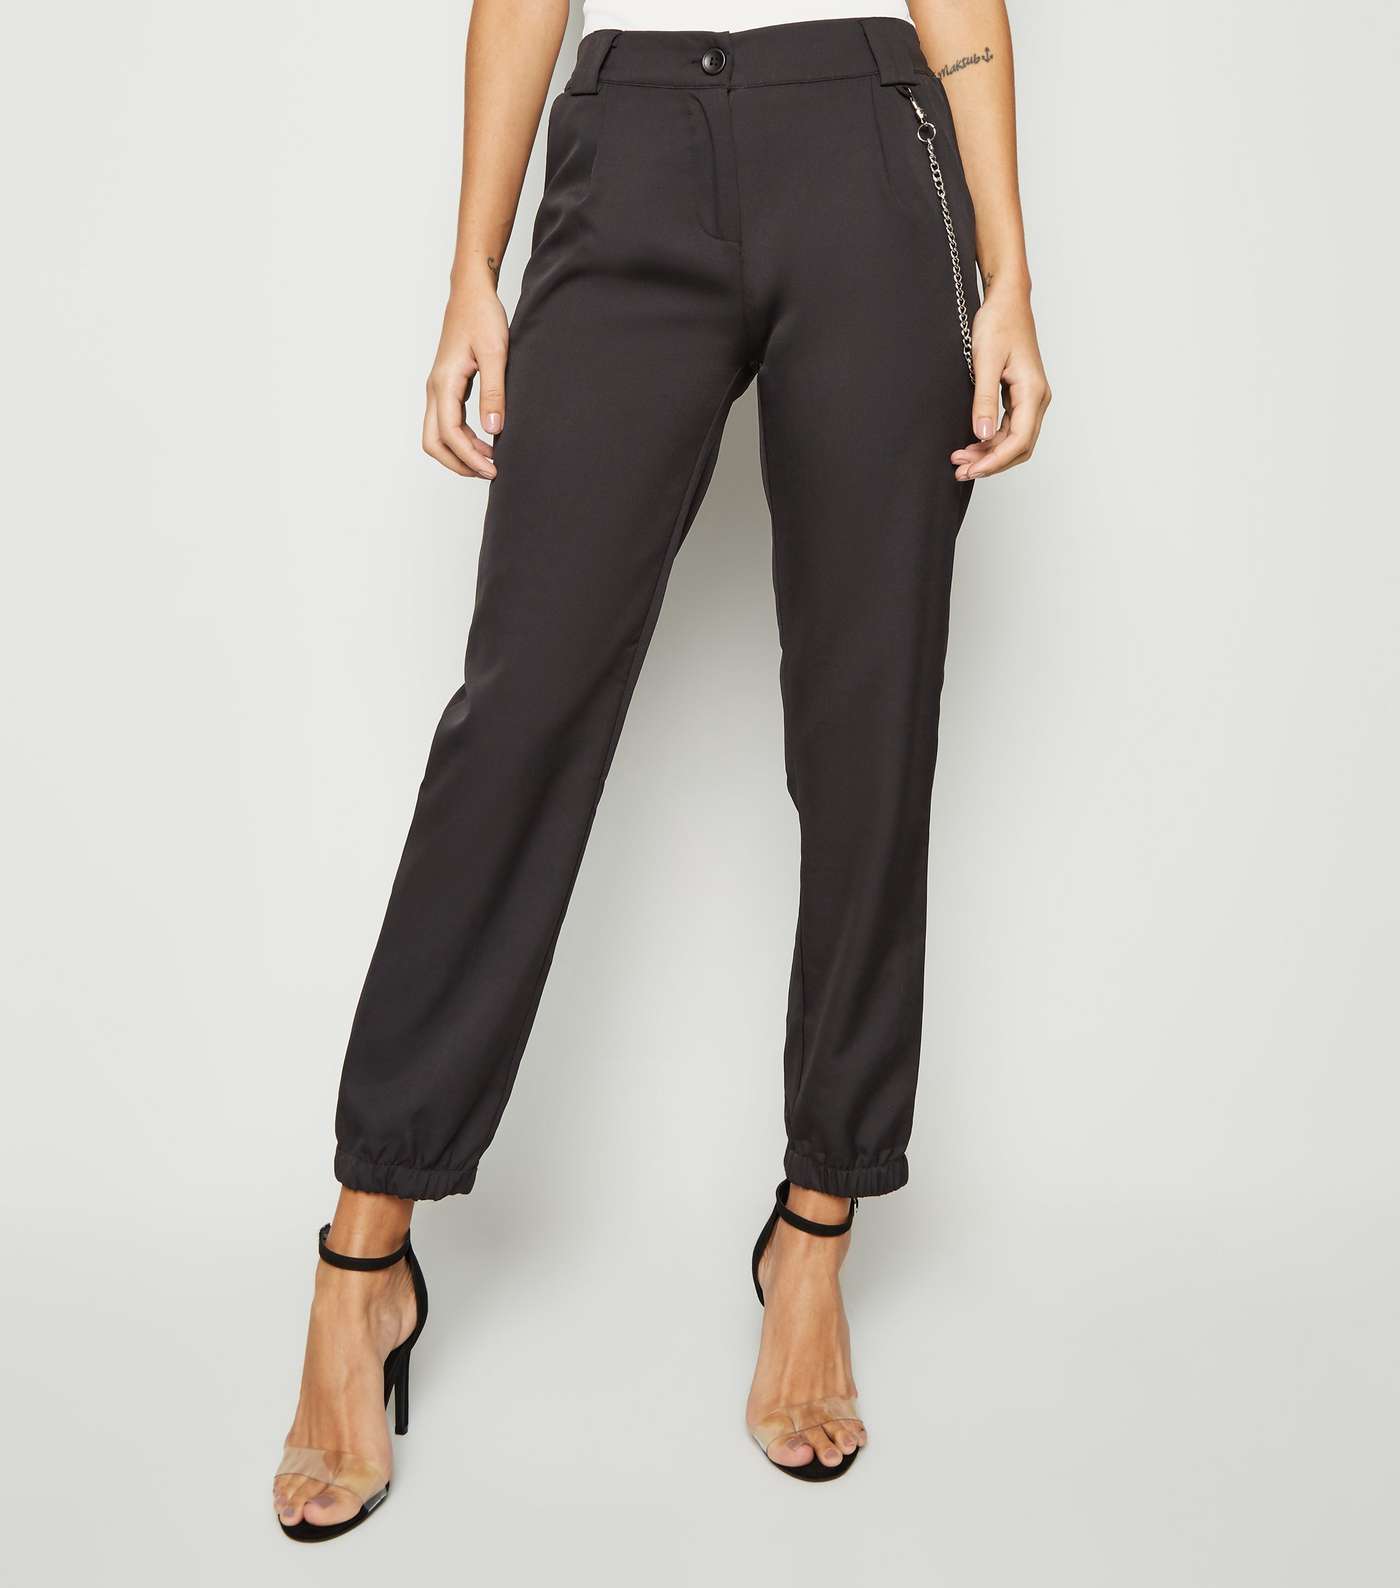 Cameo Rose Black Side Chain Trousers Image 2